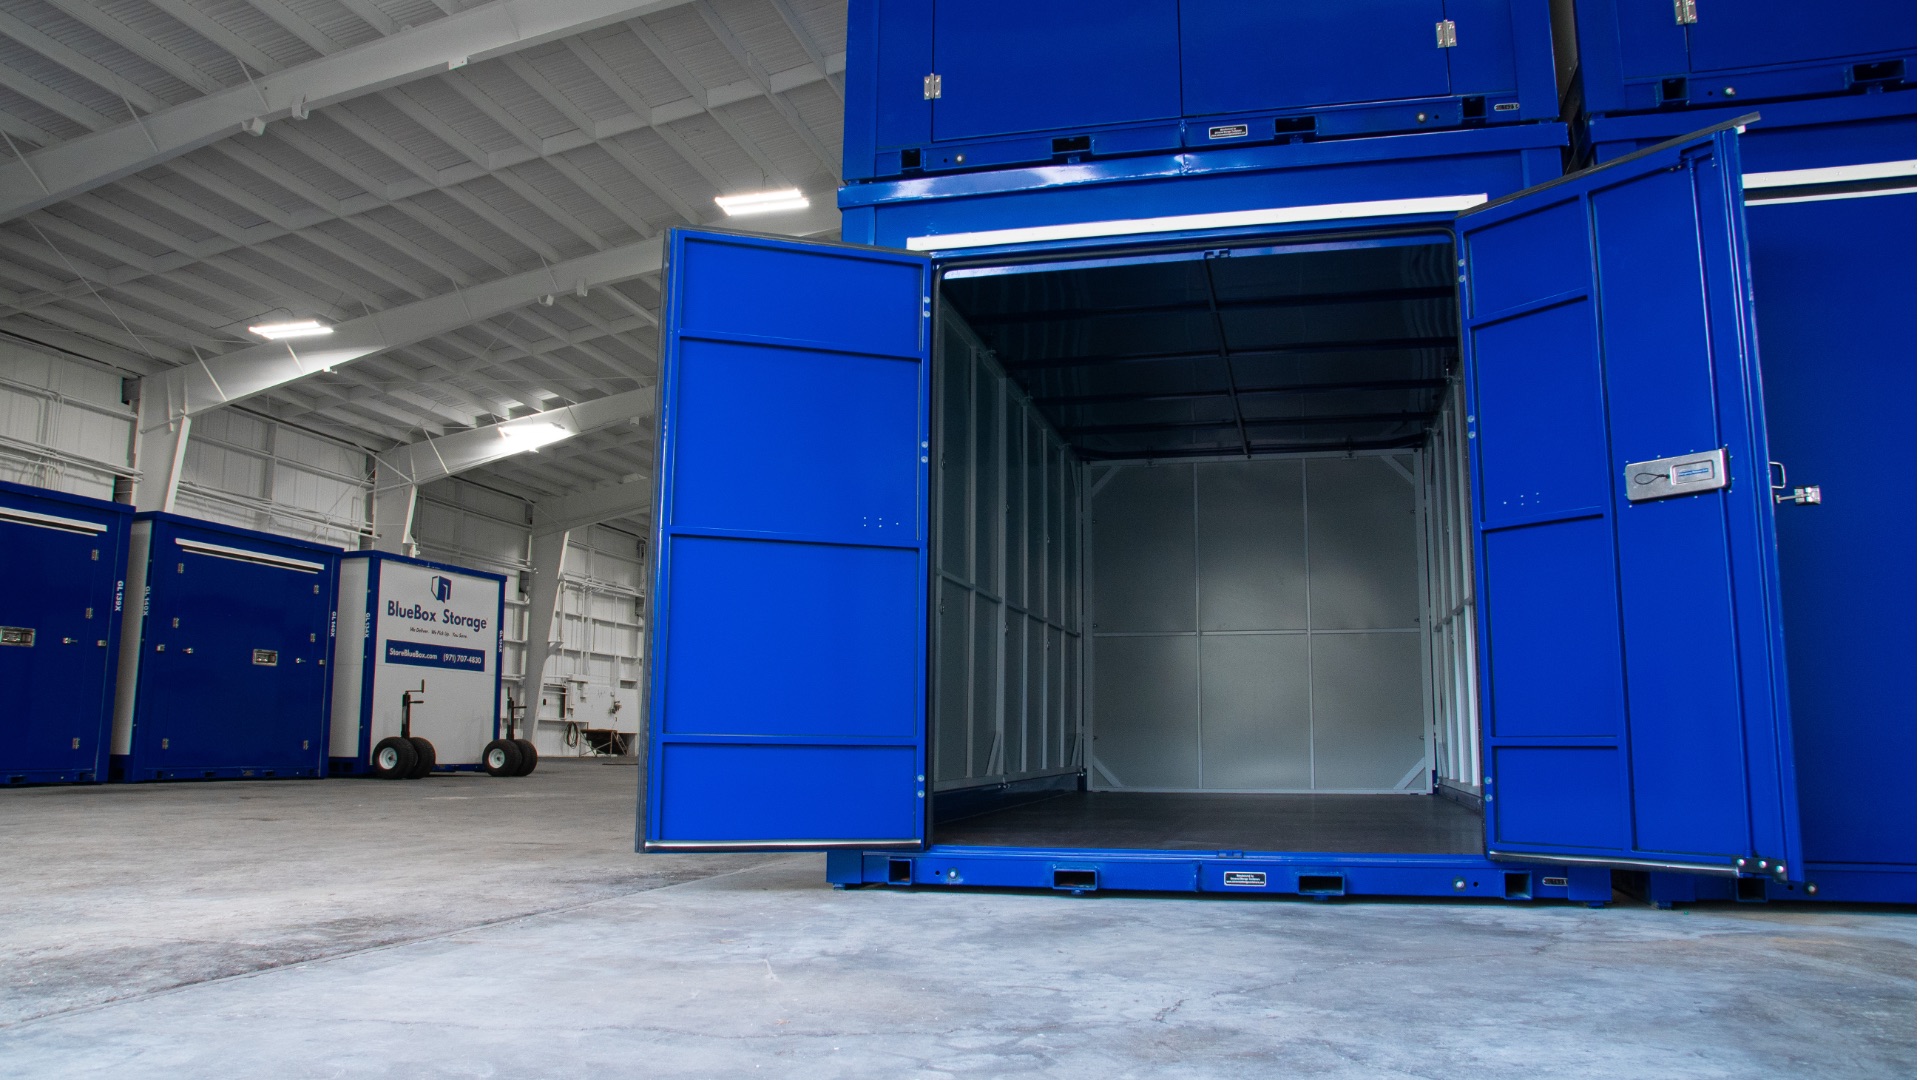 What’s the difference between portable storage and self-storage?